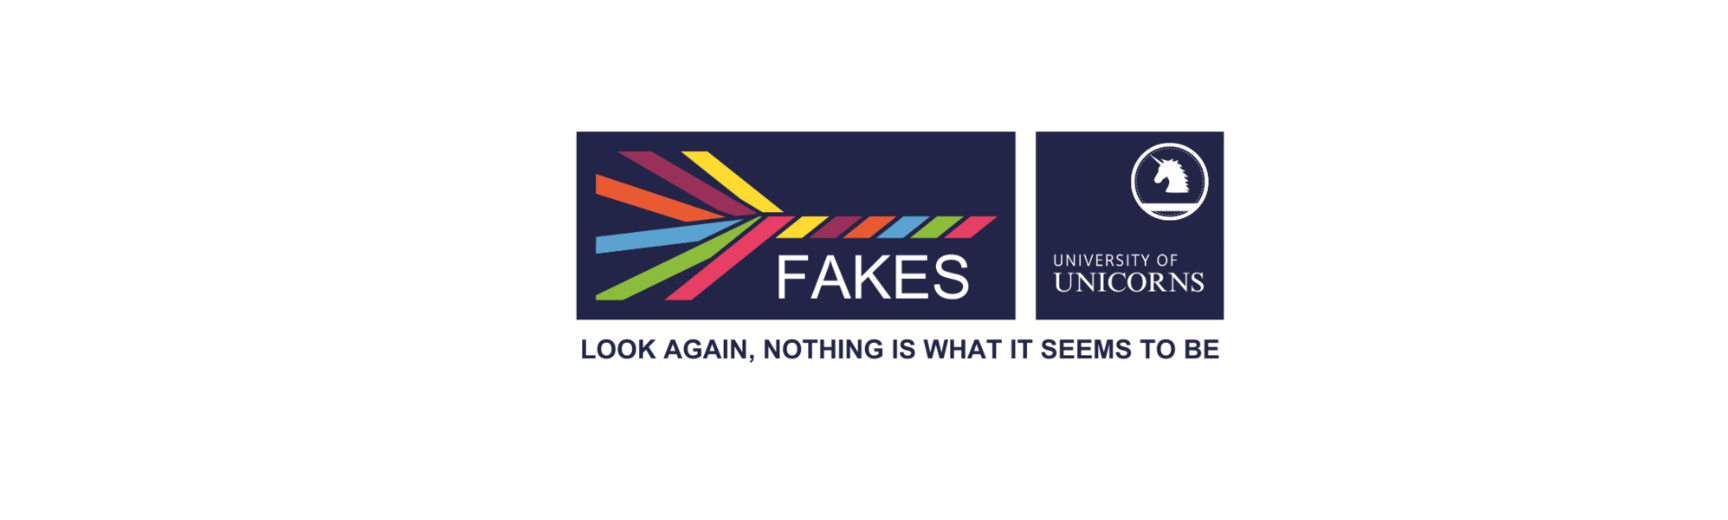 fakes banner